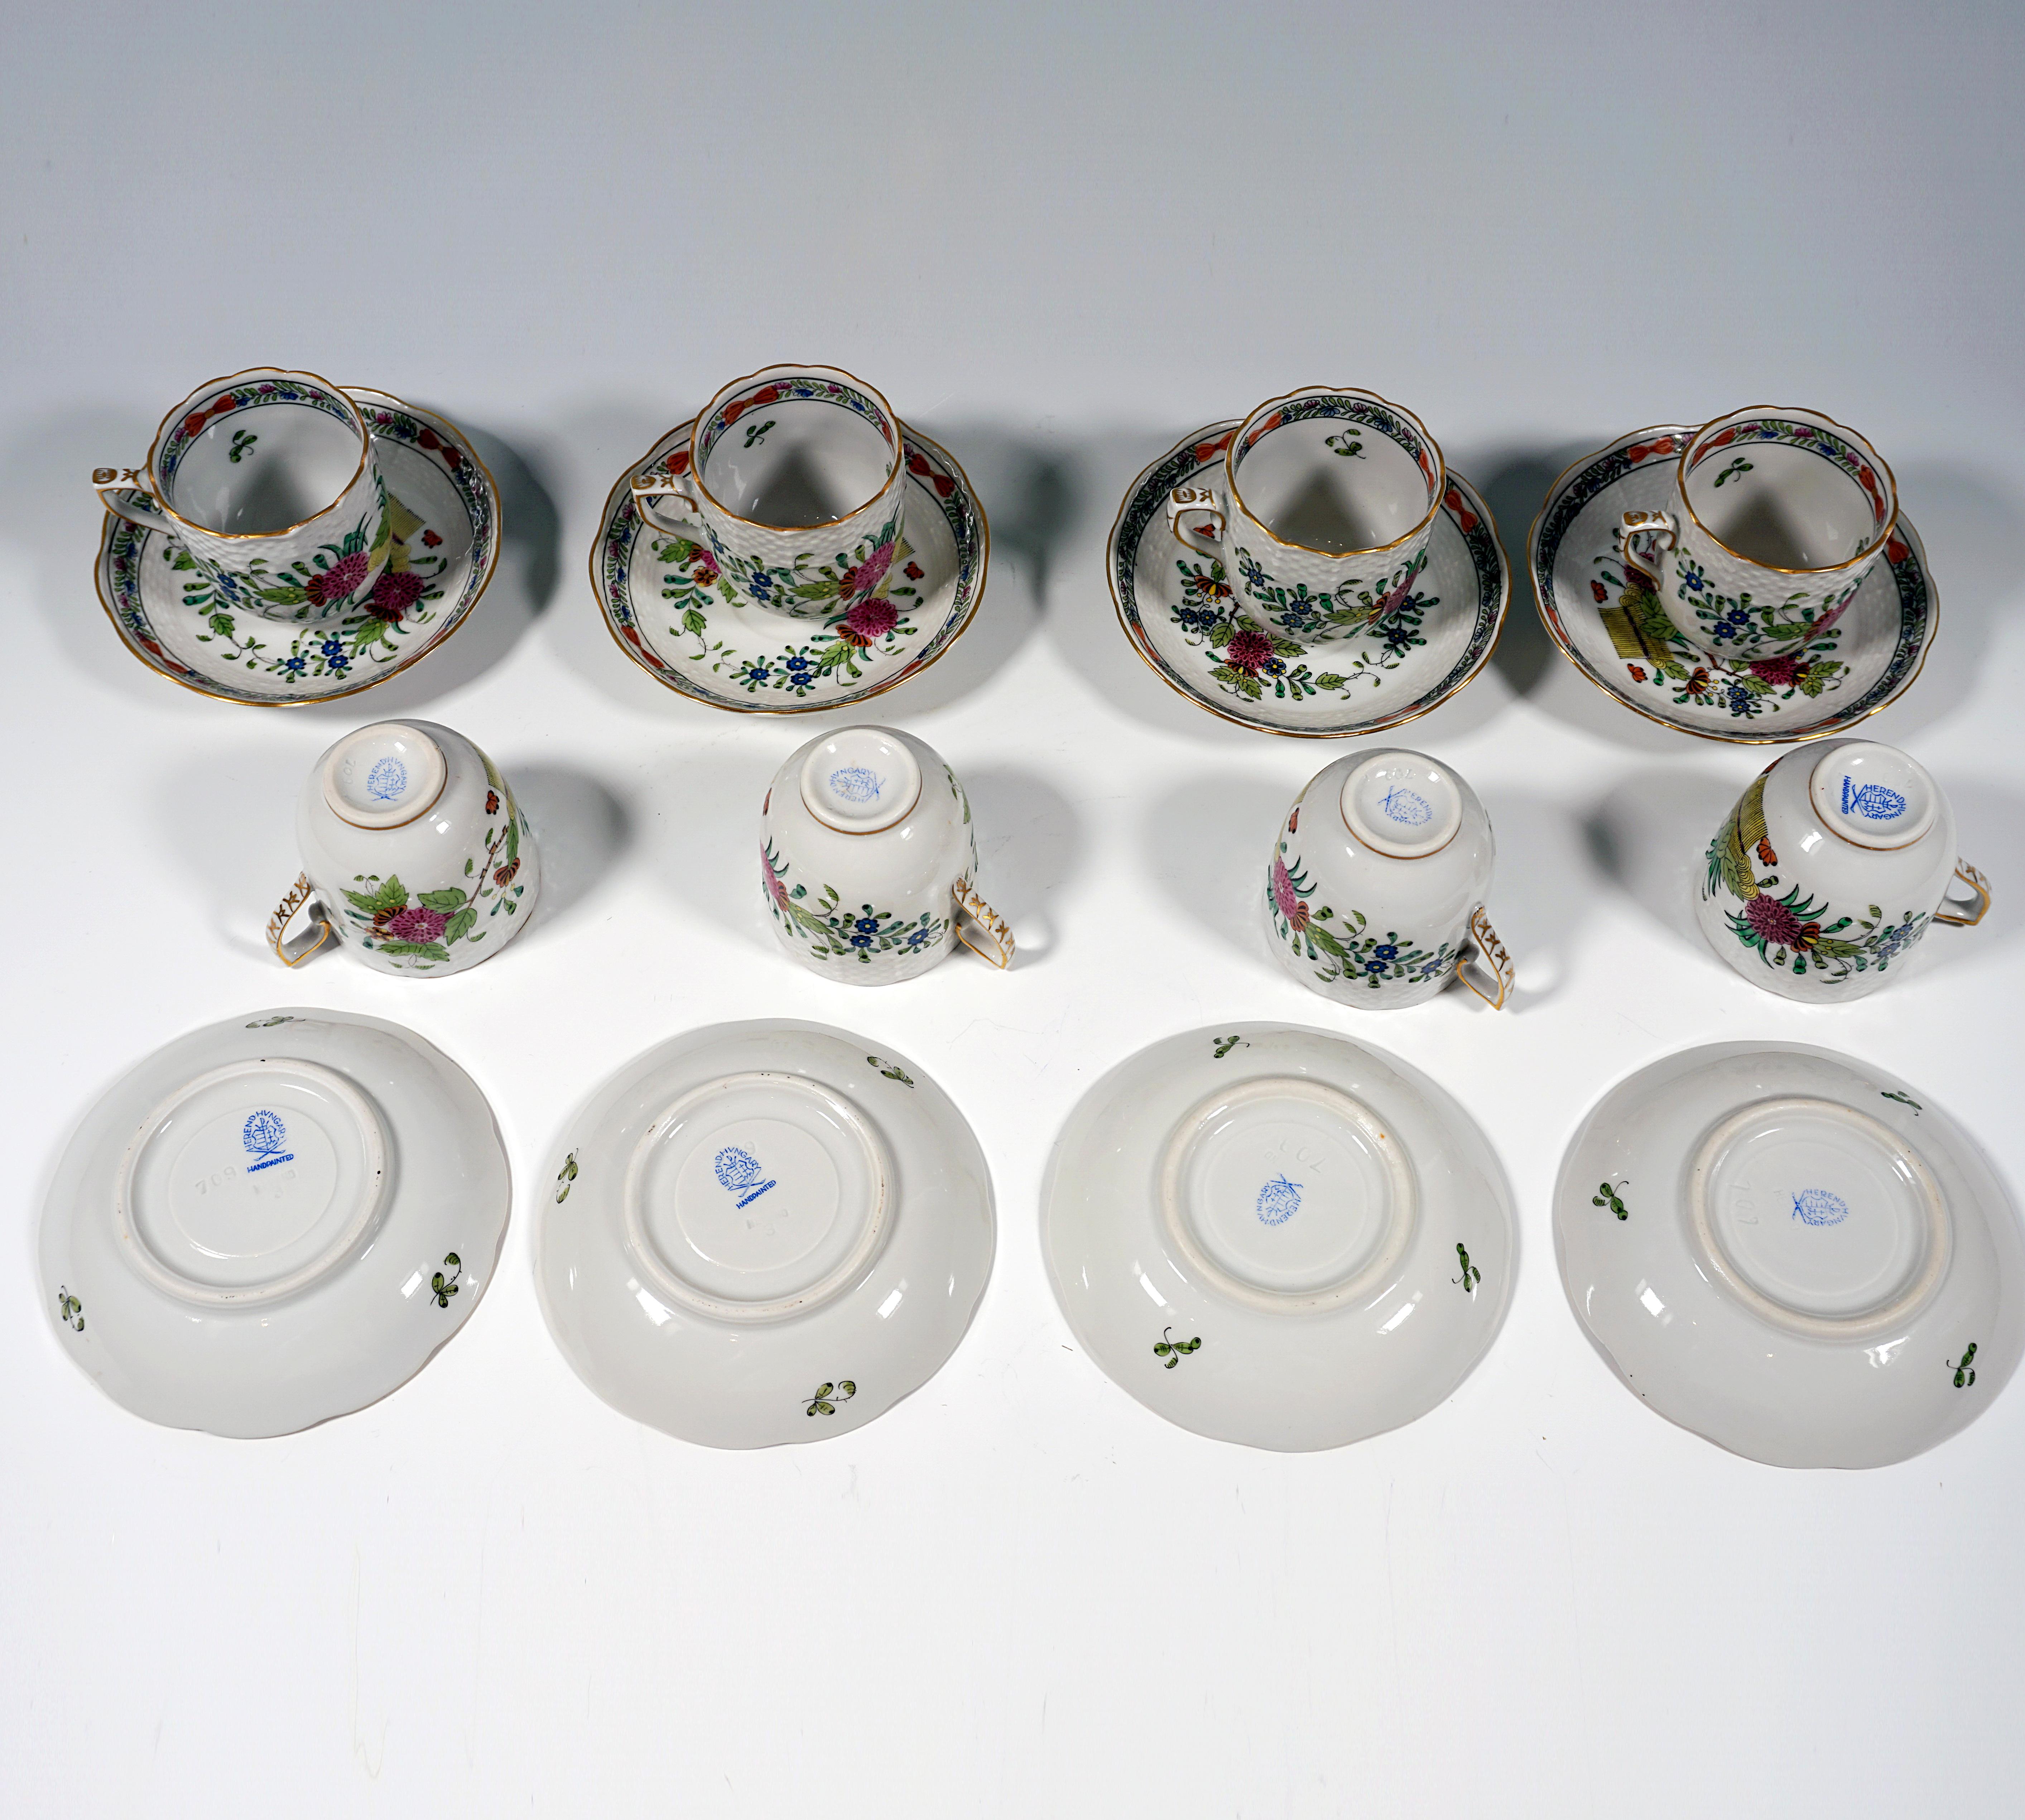 Painted Fleurs Des Indes Coffee Set For 8 Persons Herend Hungary 20th Century For Sale